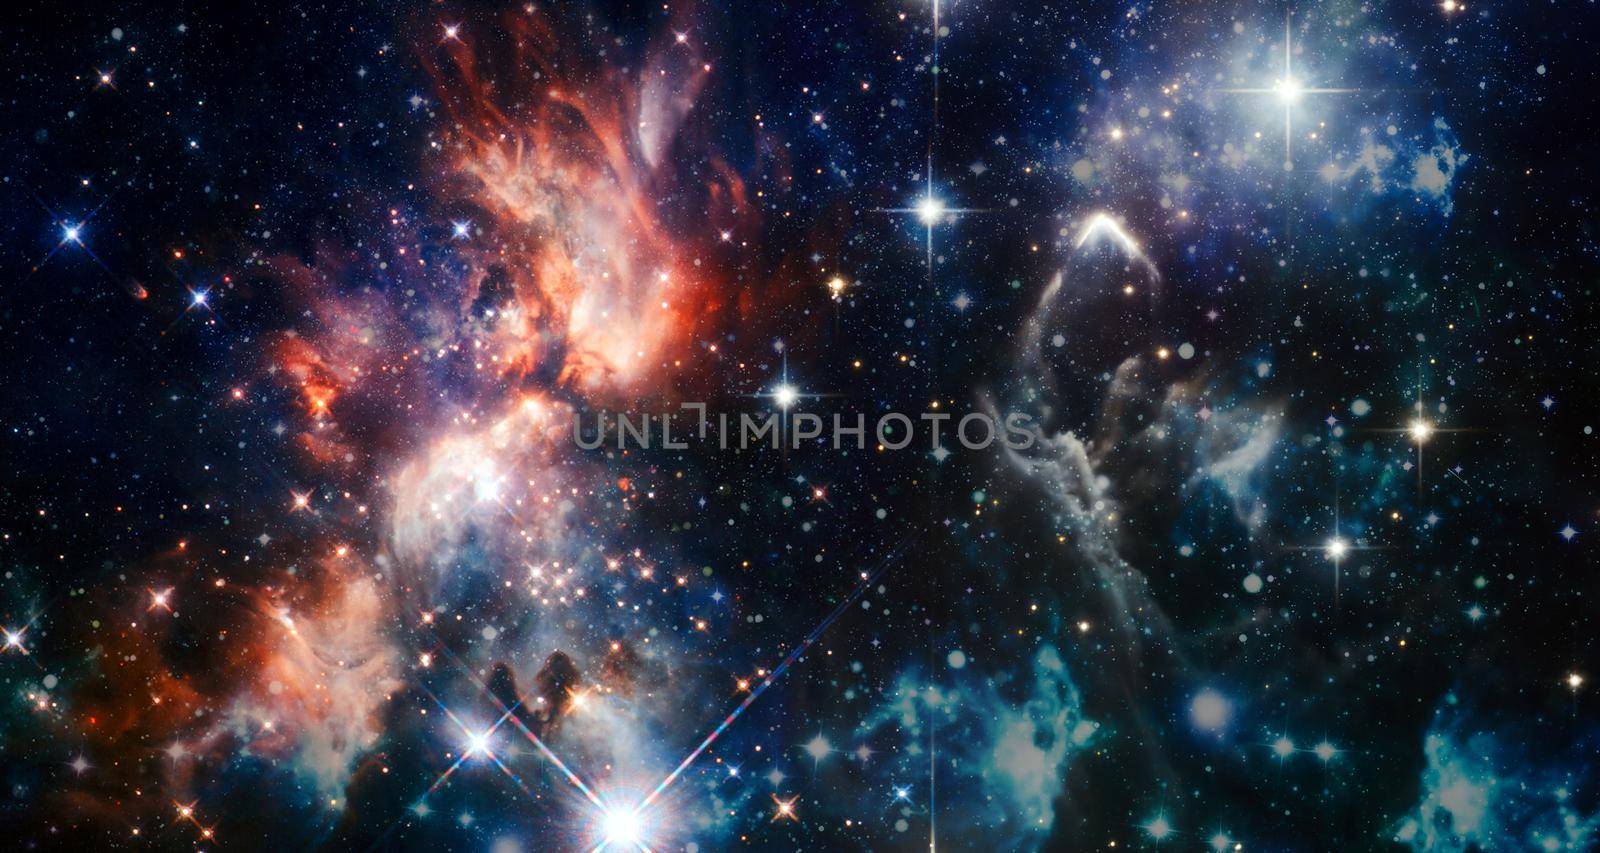 Space background with stardust and shining stars. Realistic colorful cosmos with nebula and milky way.